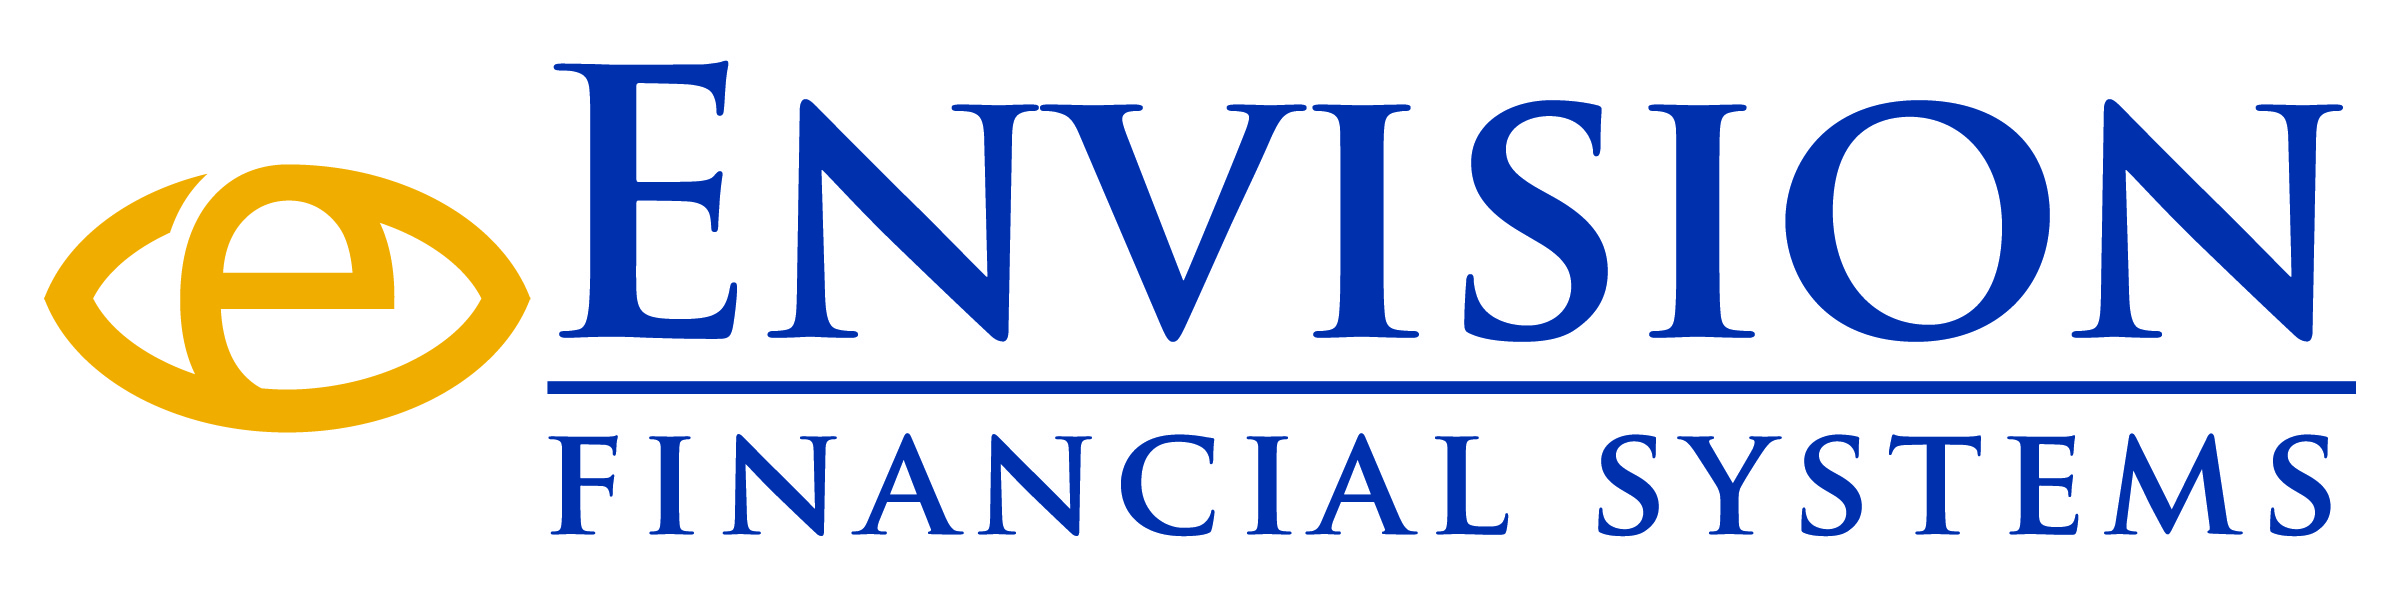 Envision Financial Systems logo